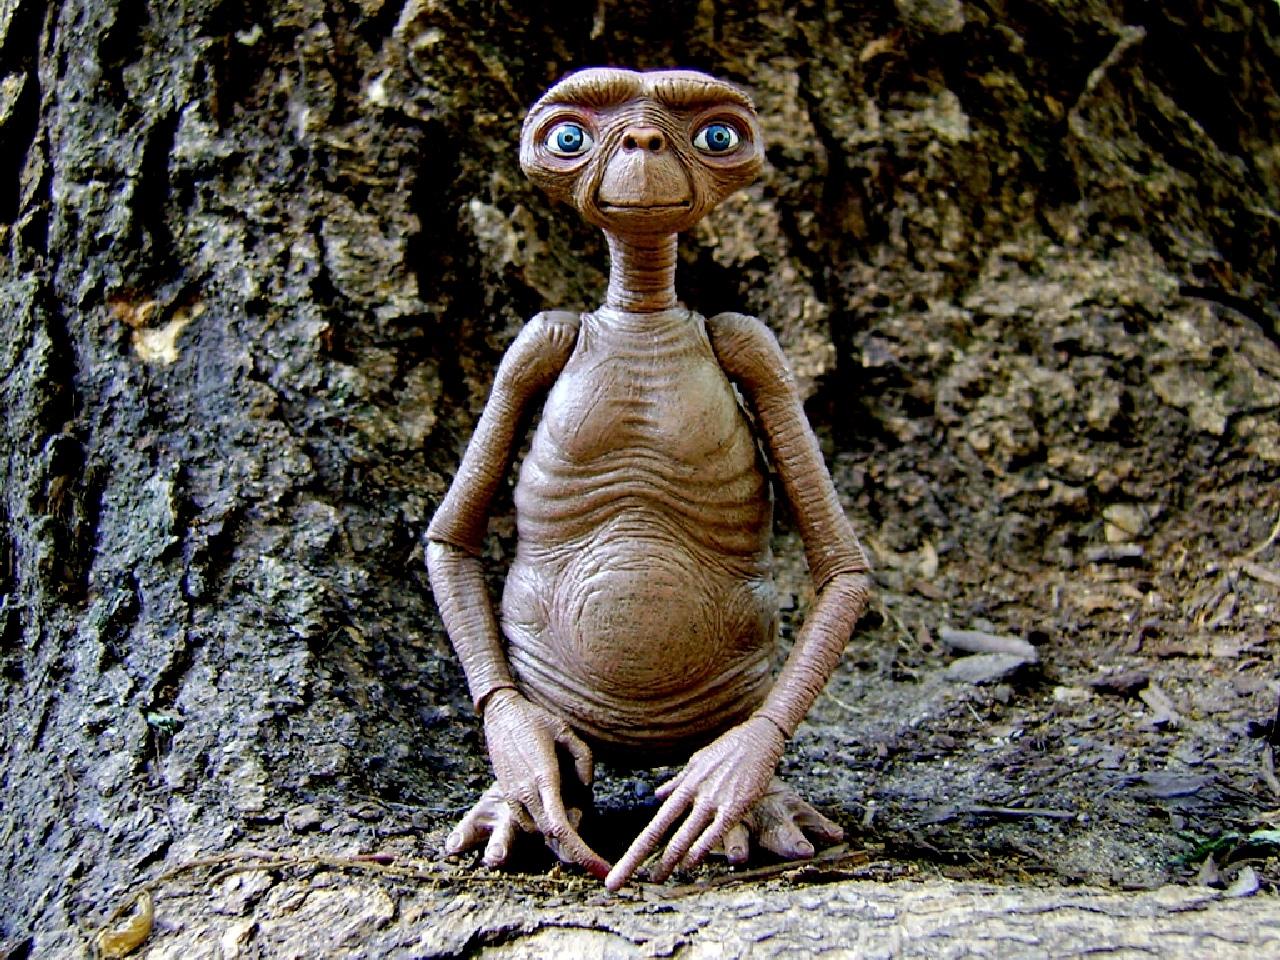 E.T. the Extra-Terrestrial download the new for mac